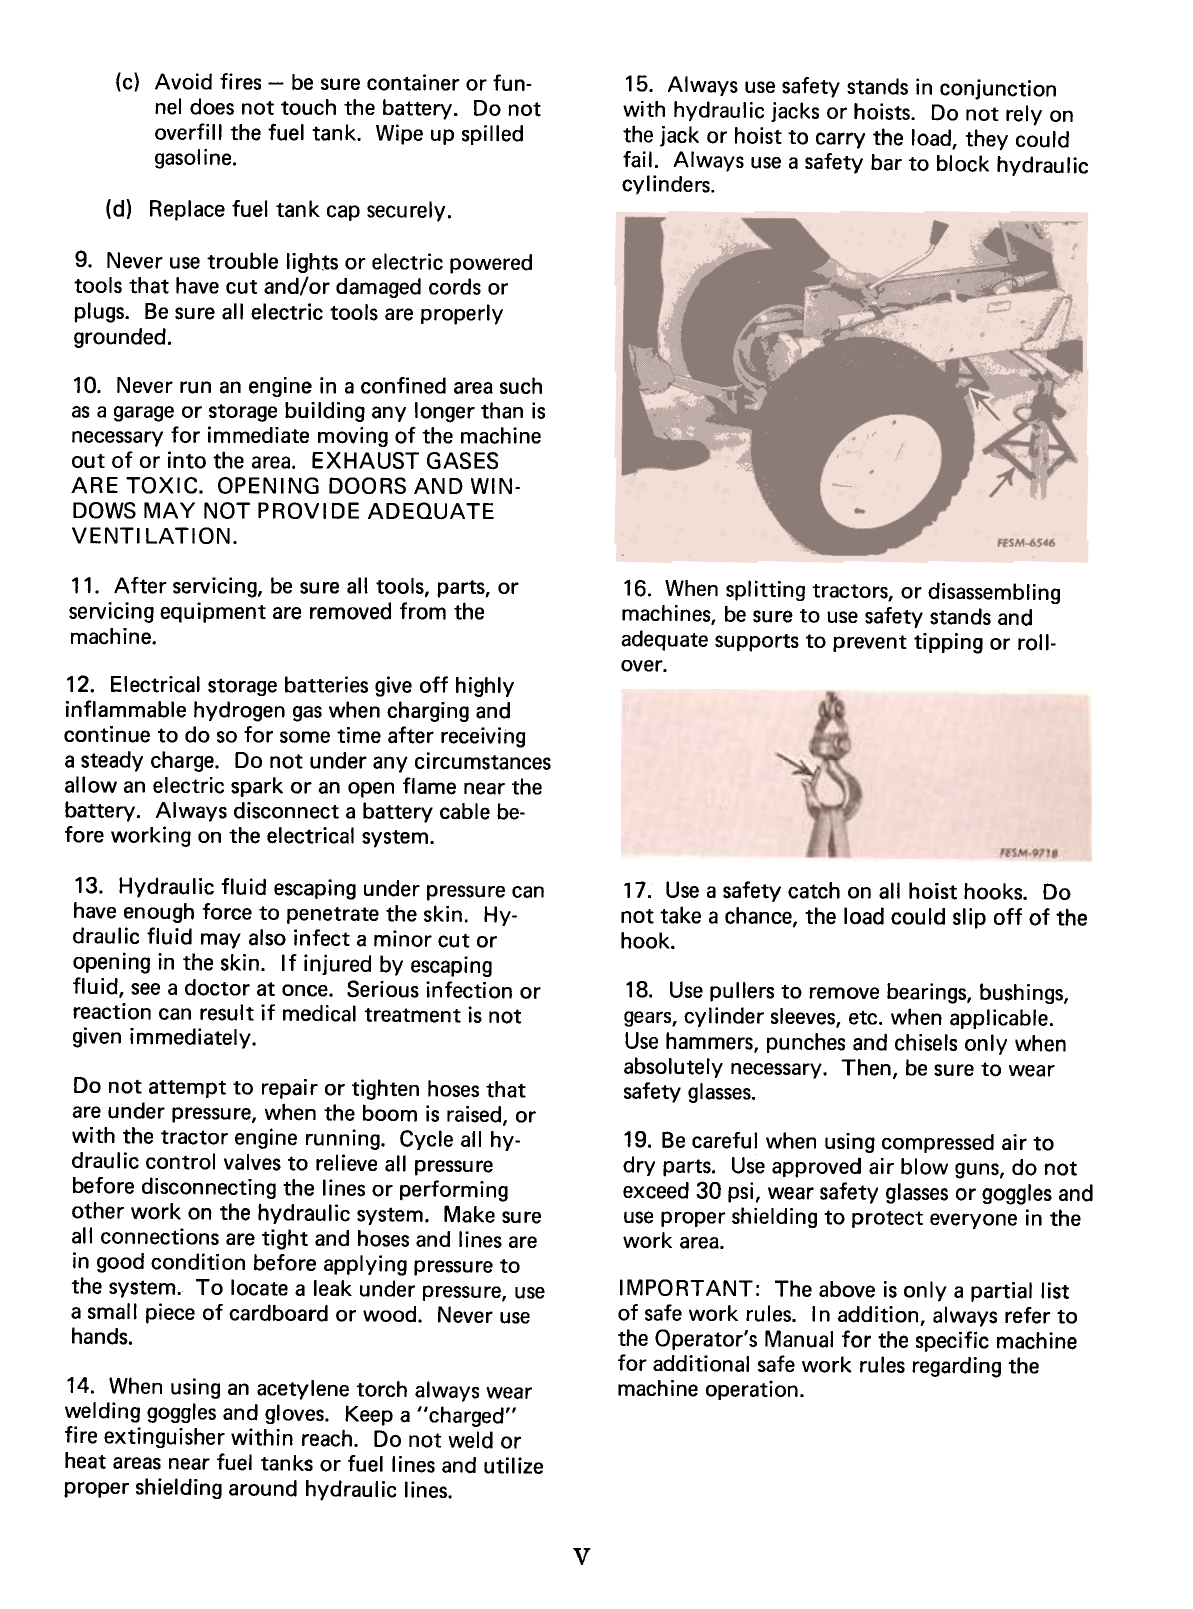 1979-1986 International Cub Cadet 582, 582 special, 682, 782, 982 garden tractor service manual Preview image 5